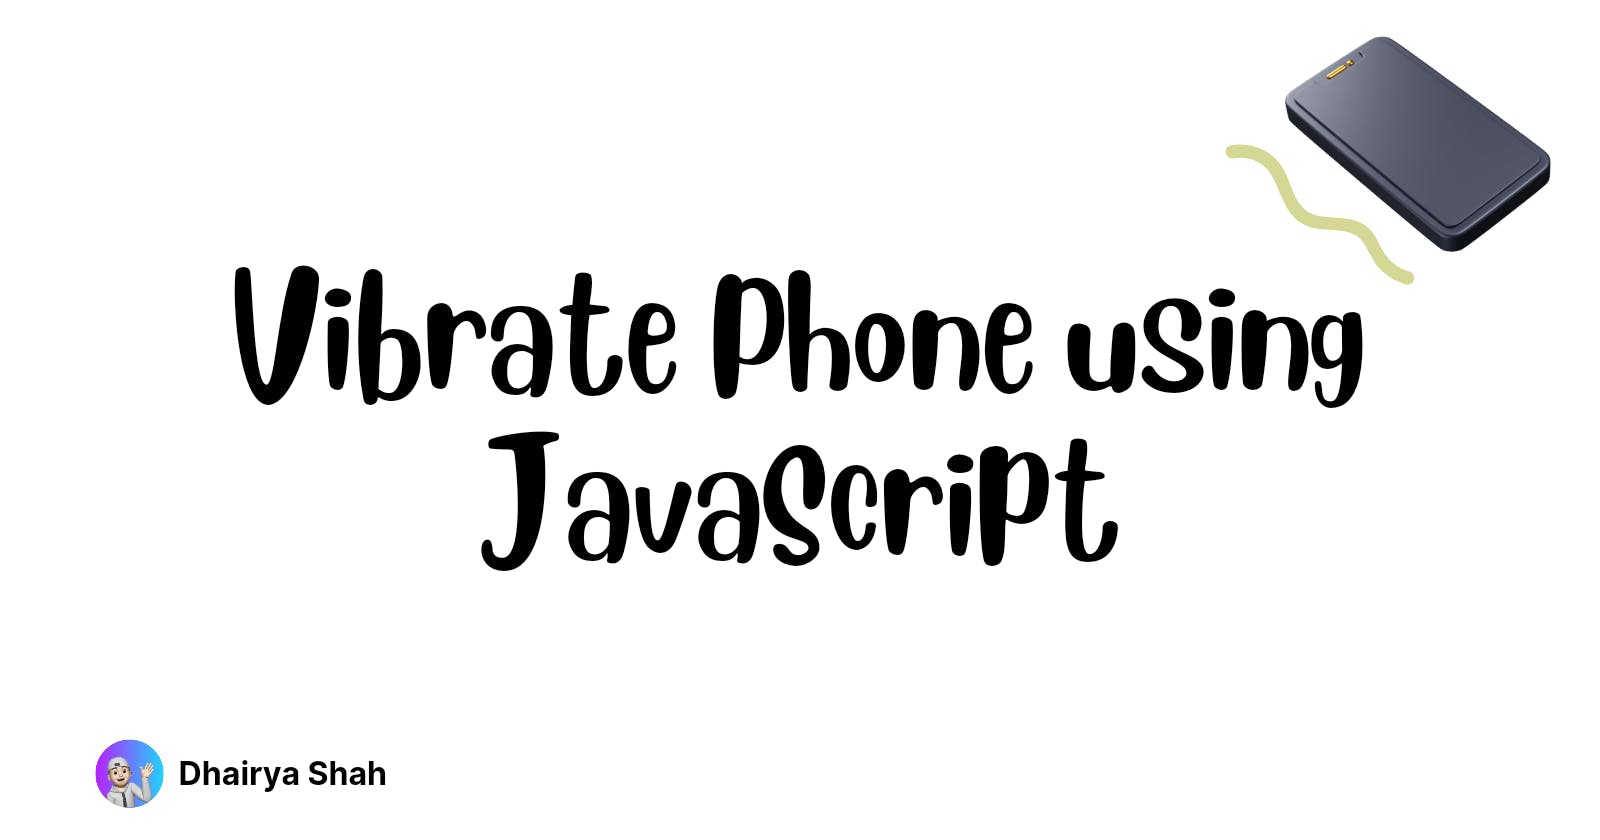 Vibrating your phone with JavaScript 📱